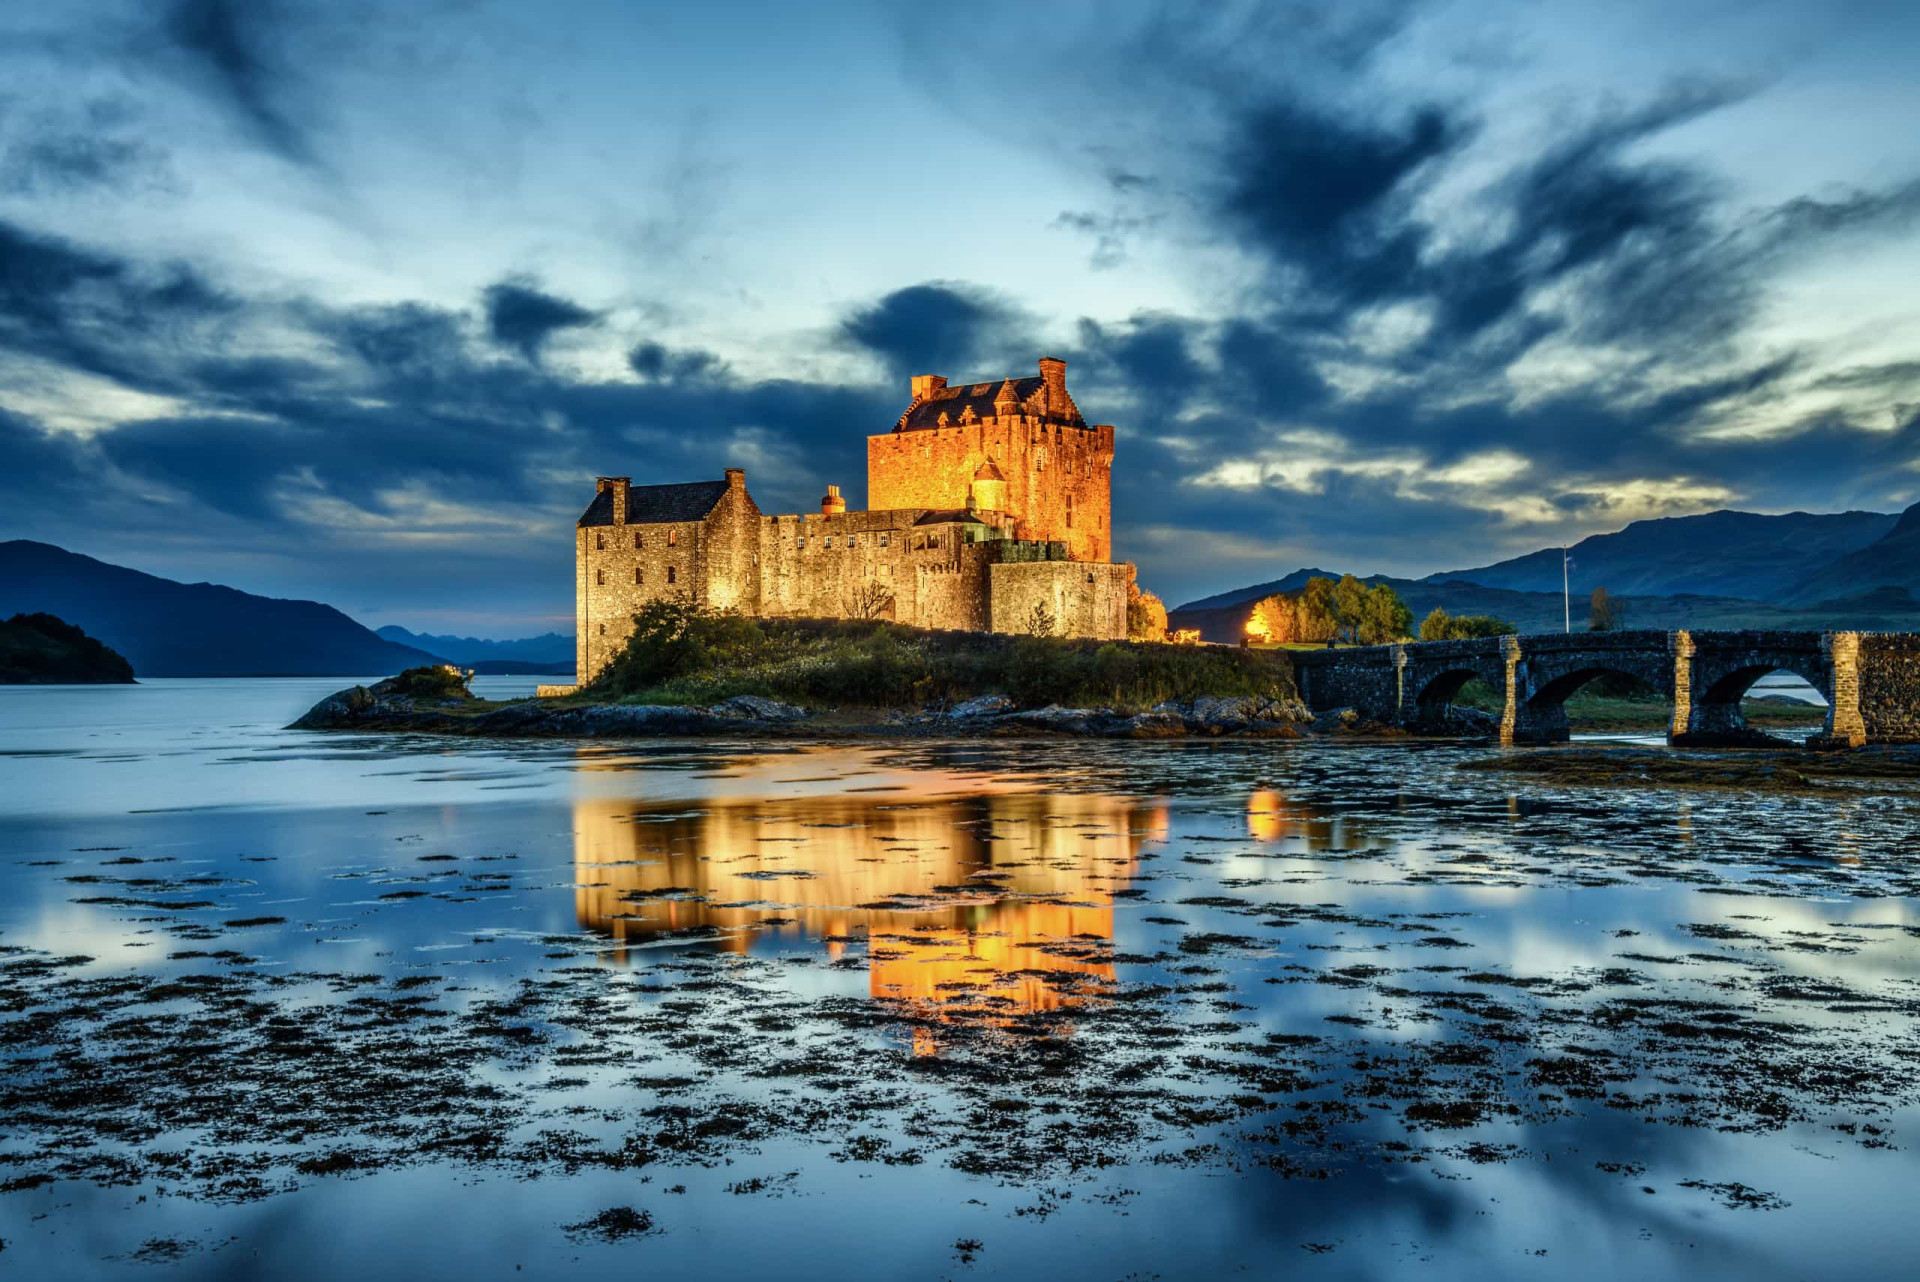 <p>Swathed in mist and steeped in mystery, Scotland's many ancient castles are beautiful to visit by day. But would you be brave enough to stay the night? Witness to many bloody battles over the centuries, several of these spectacularly-scenic <a href="https://www.starsinsider.com/travel/216856/breathtaking-castles-that-look-straight-out-of-a-fairy-tale" rel="noopener">castles</a> are said to be haunted by spectral figures who can be seen and heard stalking the historic halls and bedrooms in the dead of night. Spooked yet Click through this gallery to discover some of Scotland's most haunted castles.</p><p>You may also like:<a href="https://www.starsinsider.com/n/64251?utm_source=msn.com&utm_medium=display&utm_campaign=referral_description&utm_content=479726v1en-ca"> These celebrities have some strange superstitions </a></p>